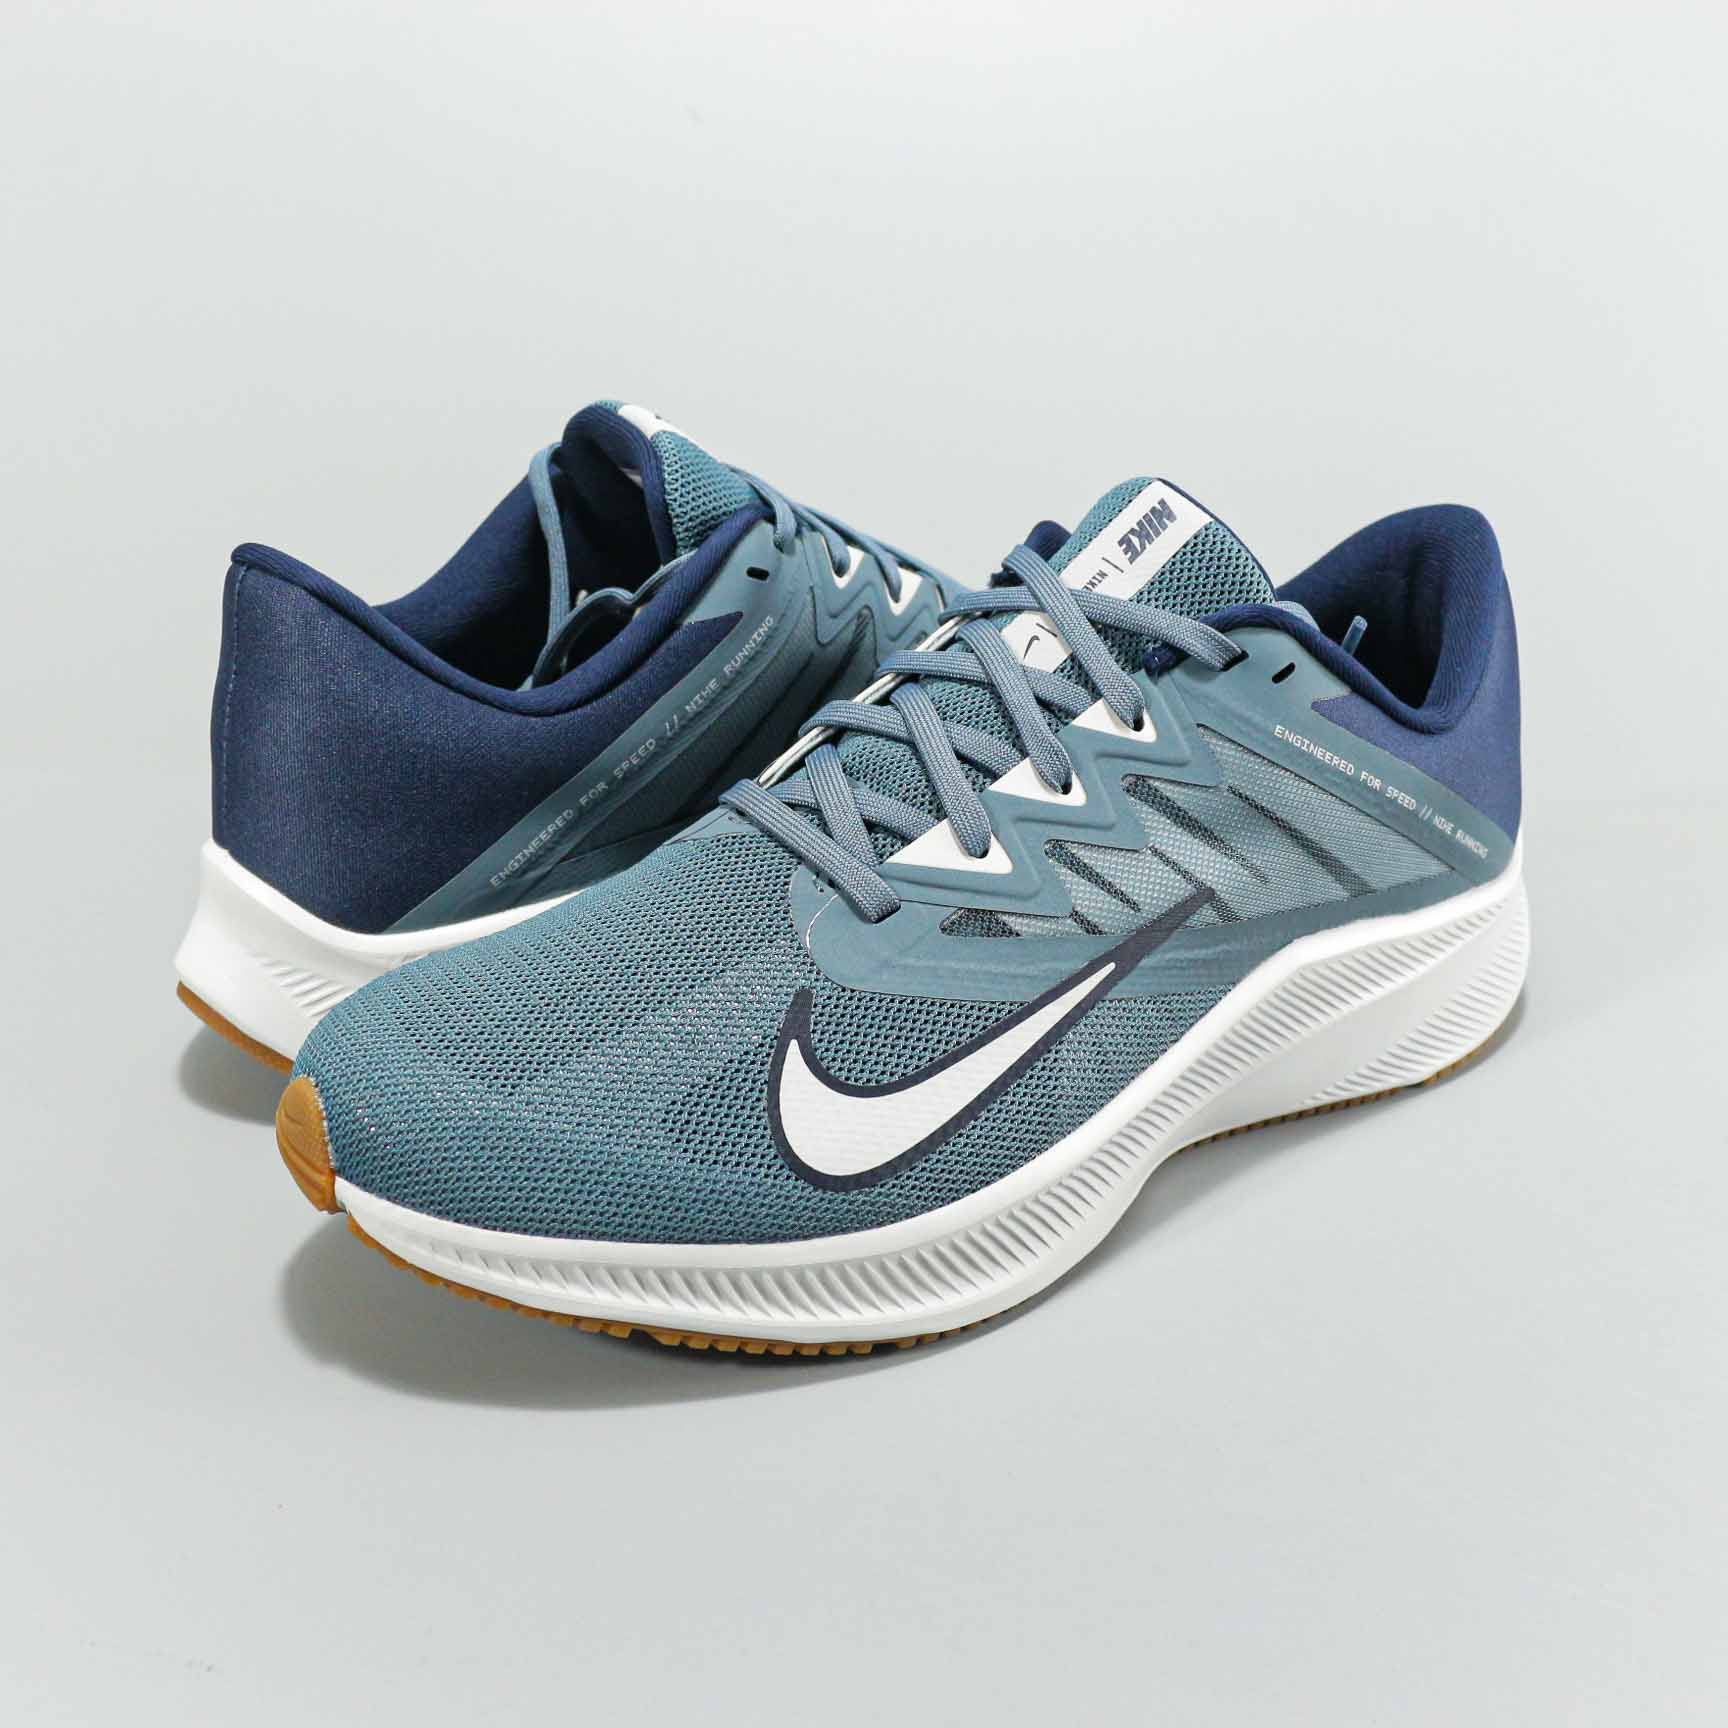 Nike Quest III Sea Blue White Running Shoes